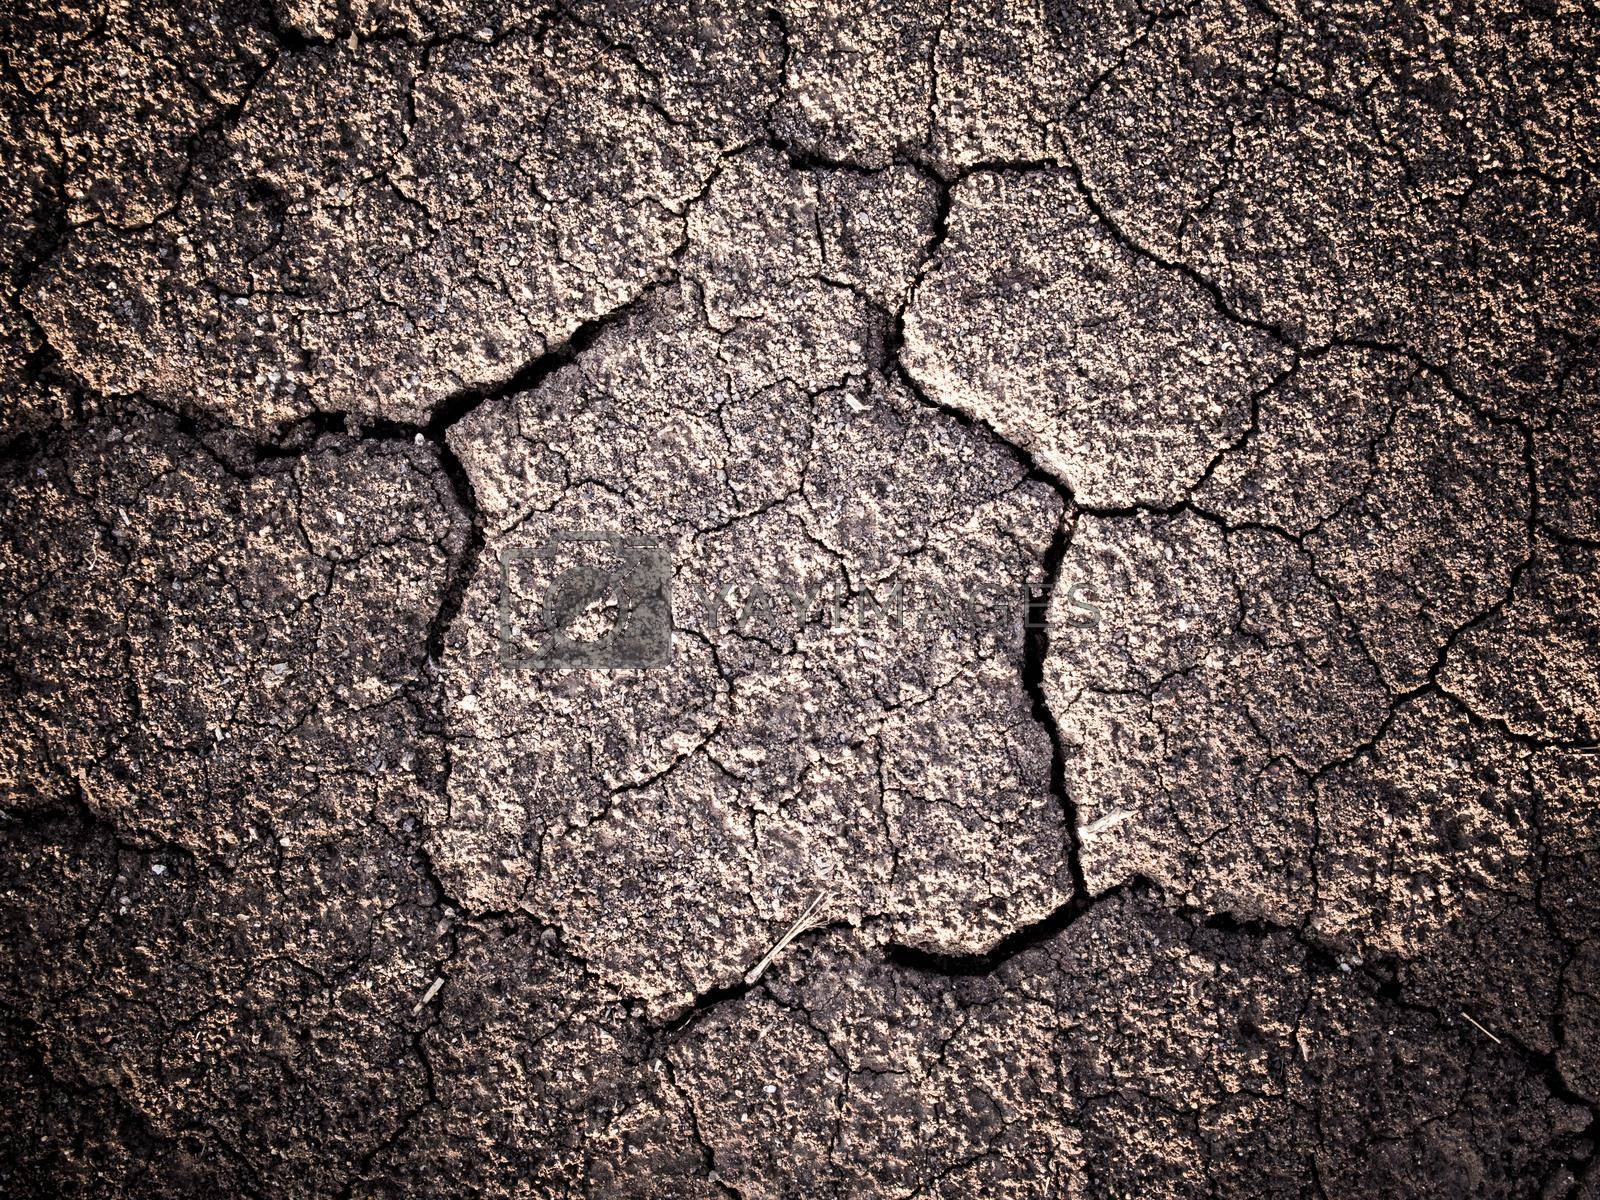 Cracked and separated on dried soil